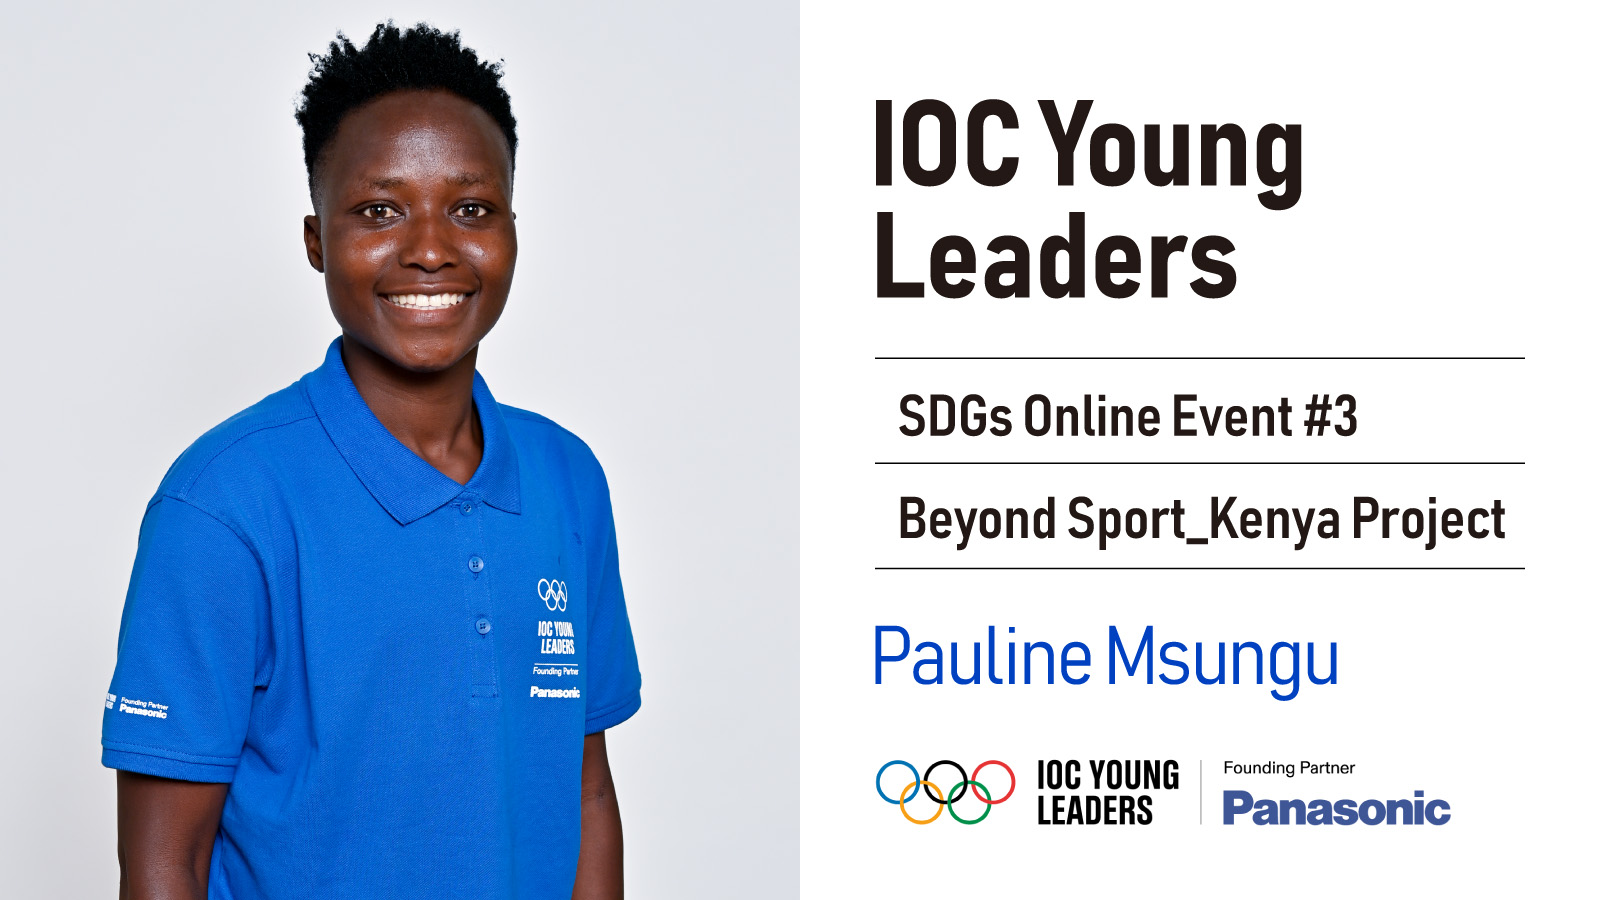 IOC Young Leader Pauline Msungu Uses Sport to Motivate and Empower Young People in Kenya